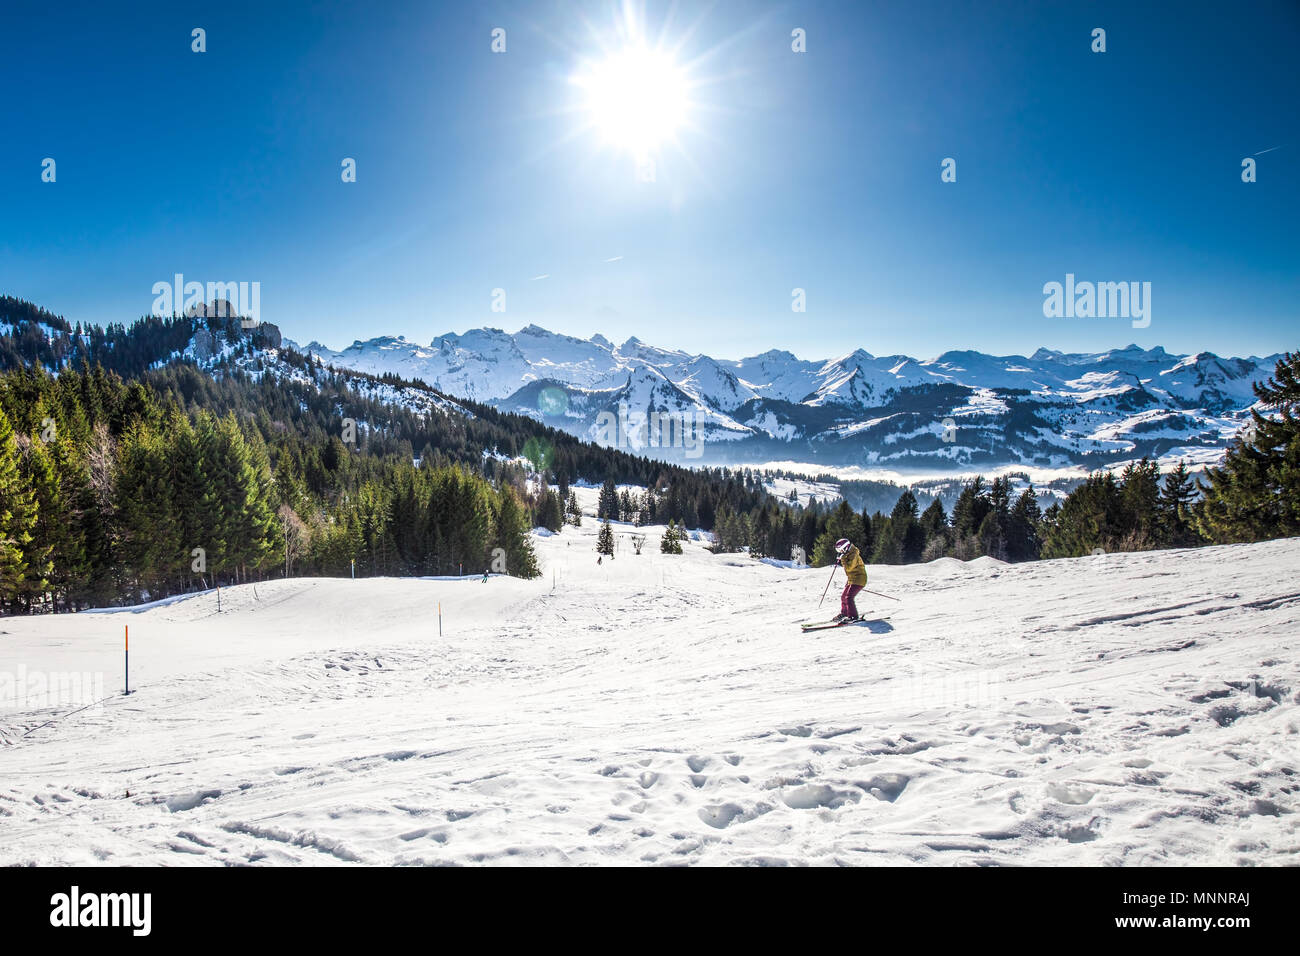 Beautiful winter landscape picture. Skier skiing in Swiss Alps covered by snow. Ibergeregg, Switzerland, Europe. Stock Photo